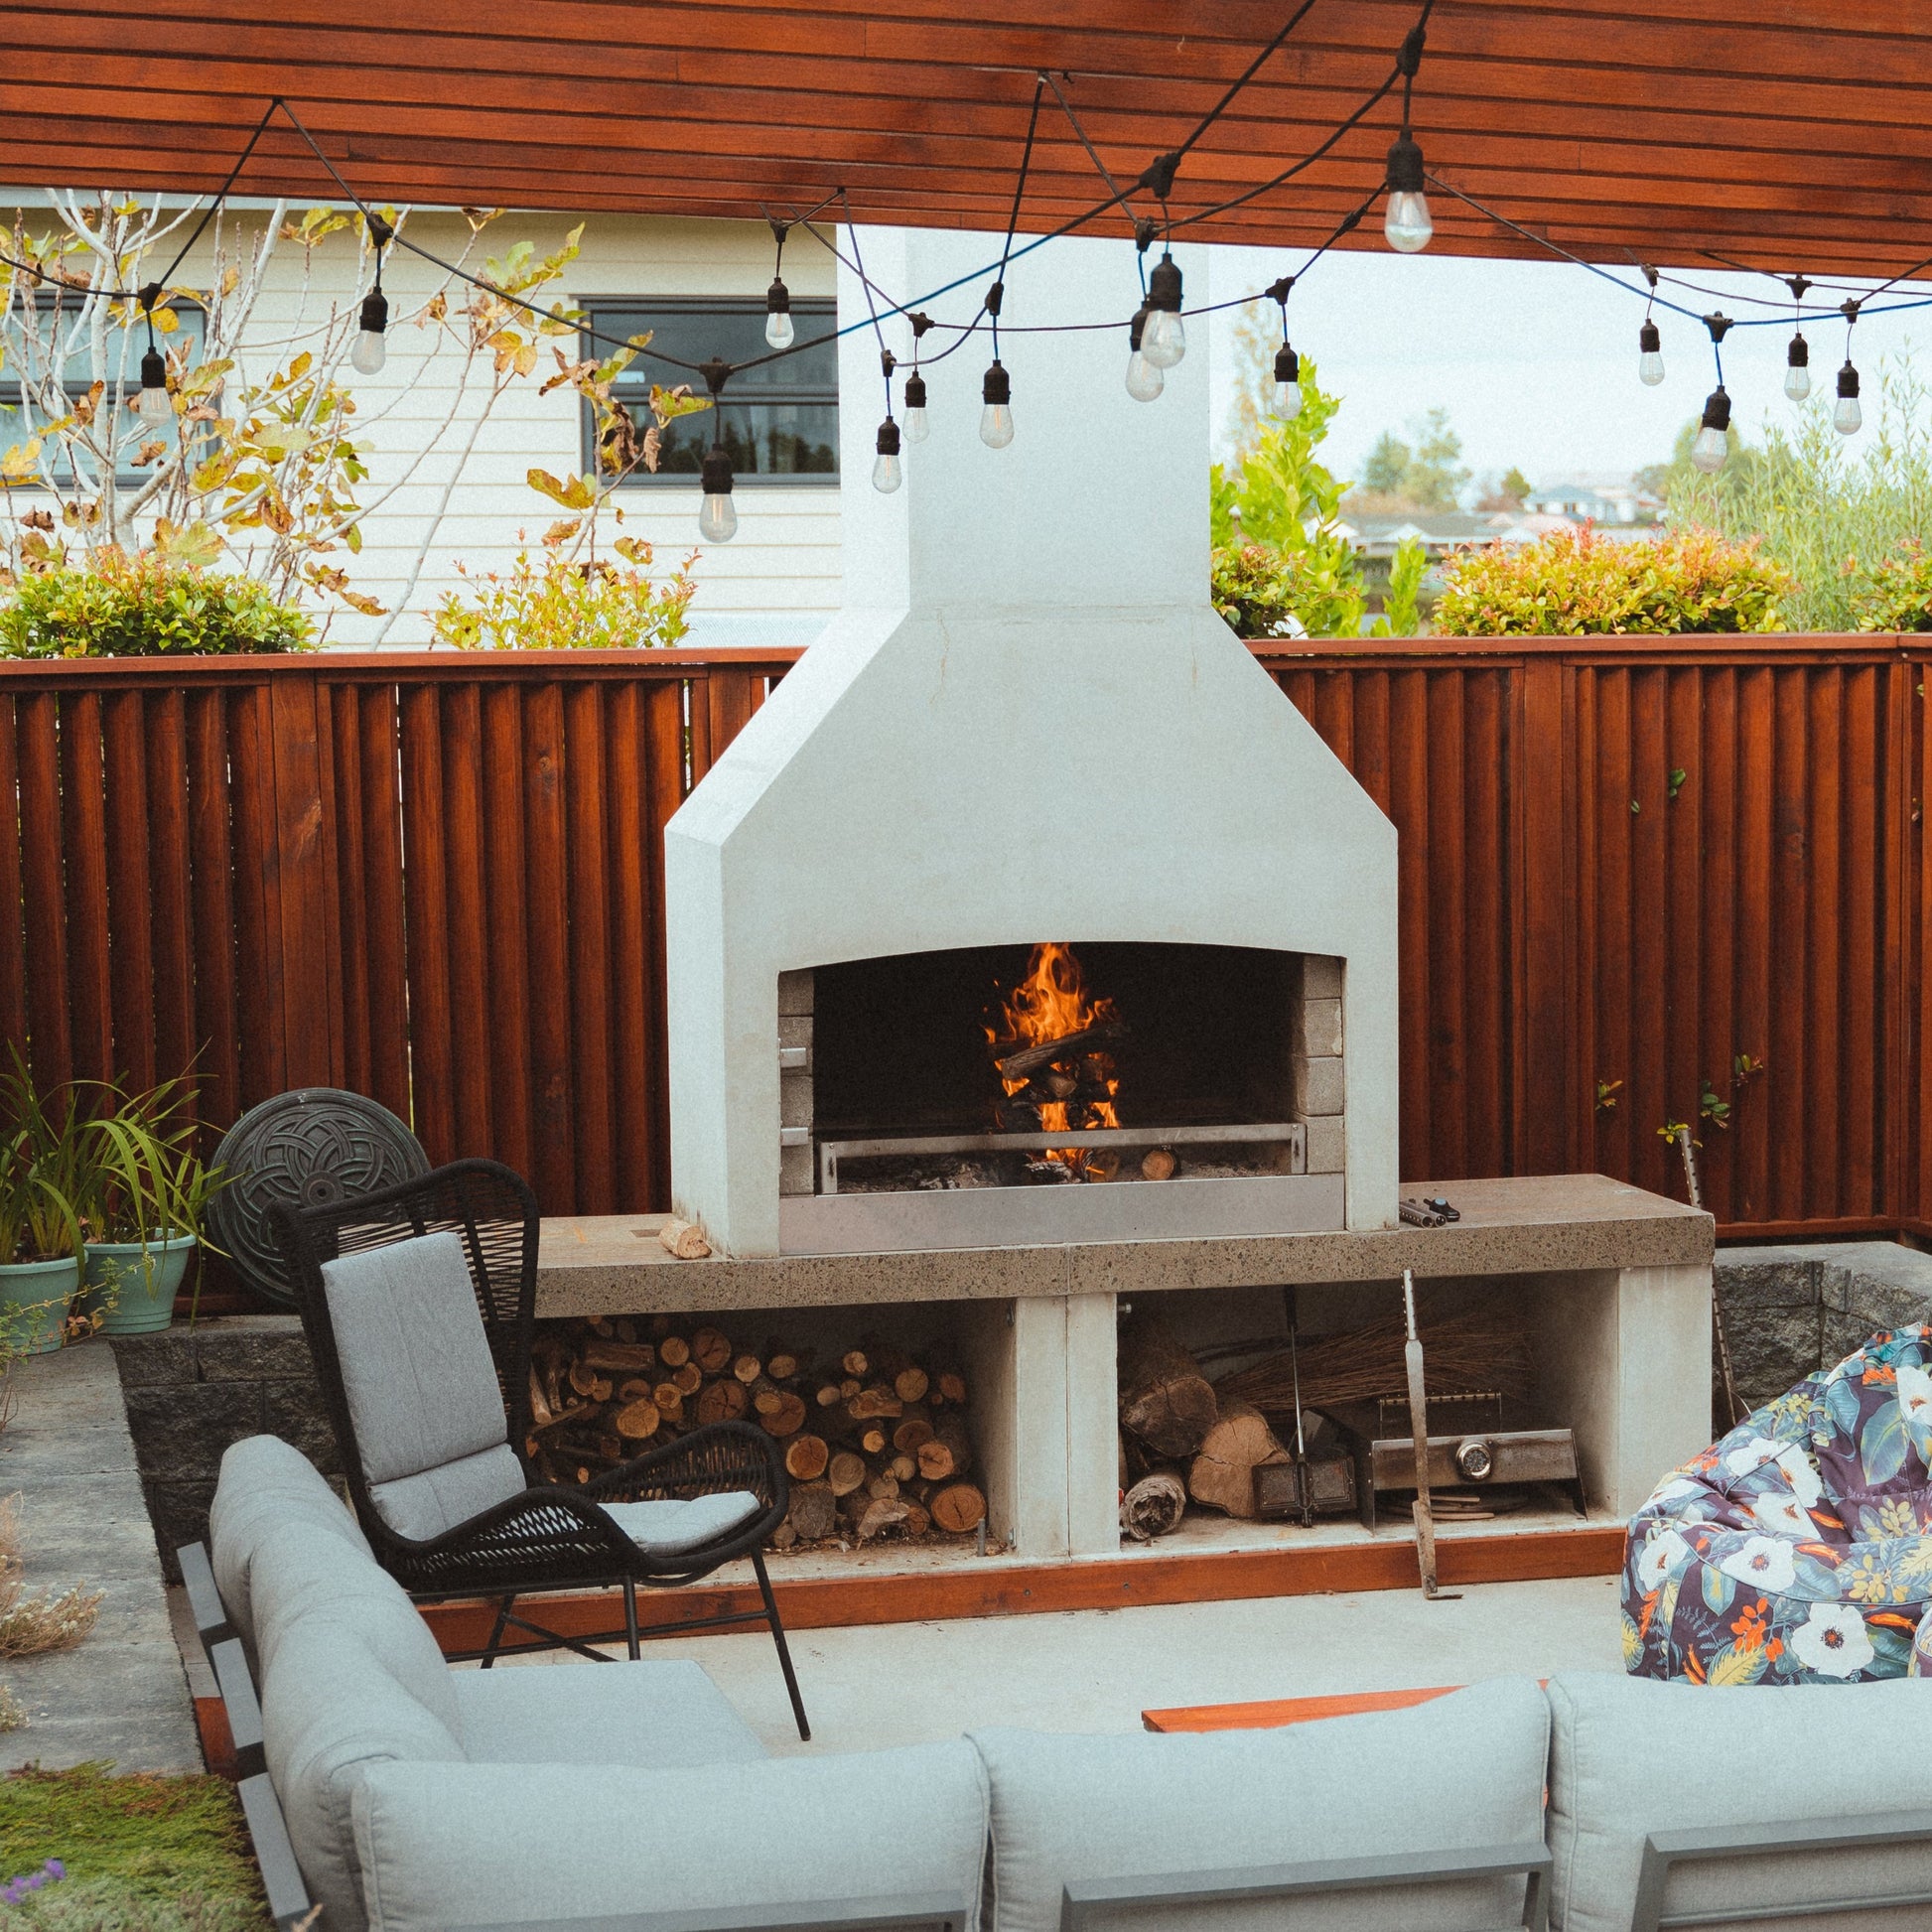 Flare Premier Outdoor Fire  Heating Home and Living Home Solutions Home Heating Wood Fires Log Burners woodfires Gas heaters Outdoor heating